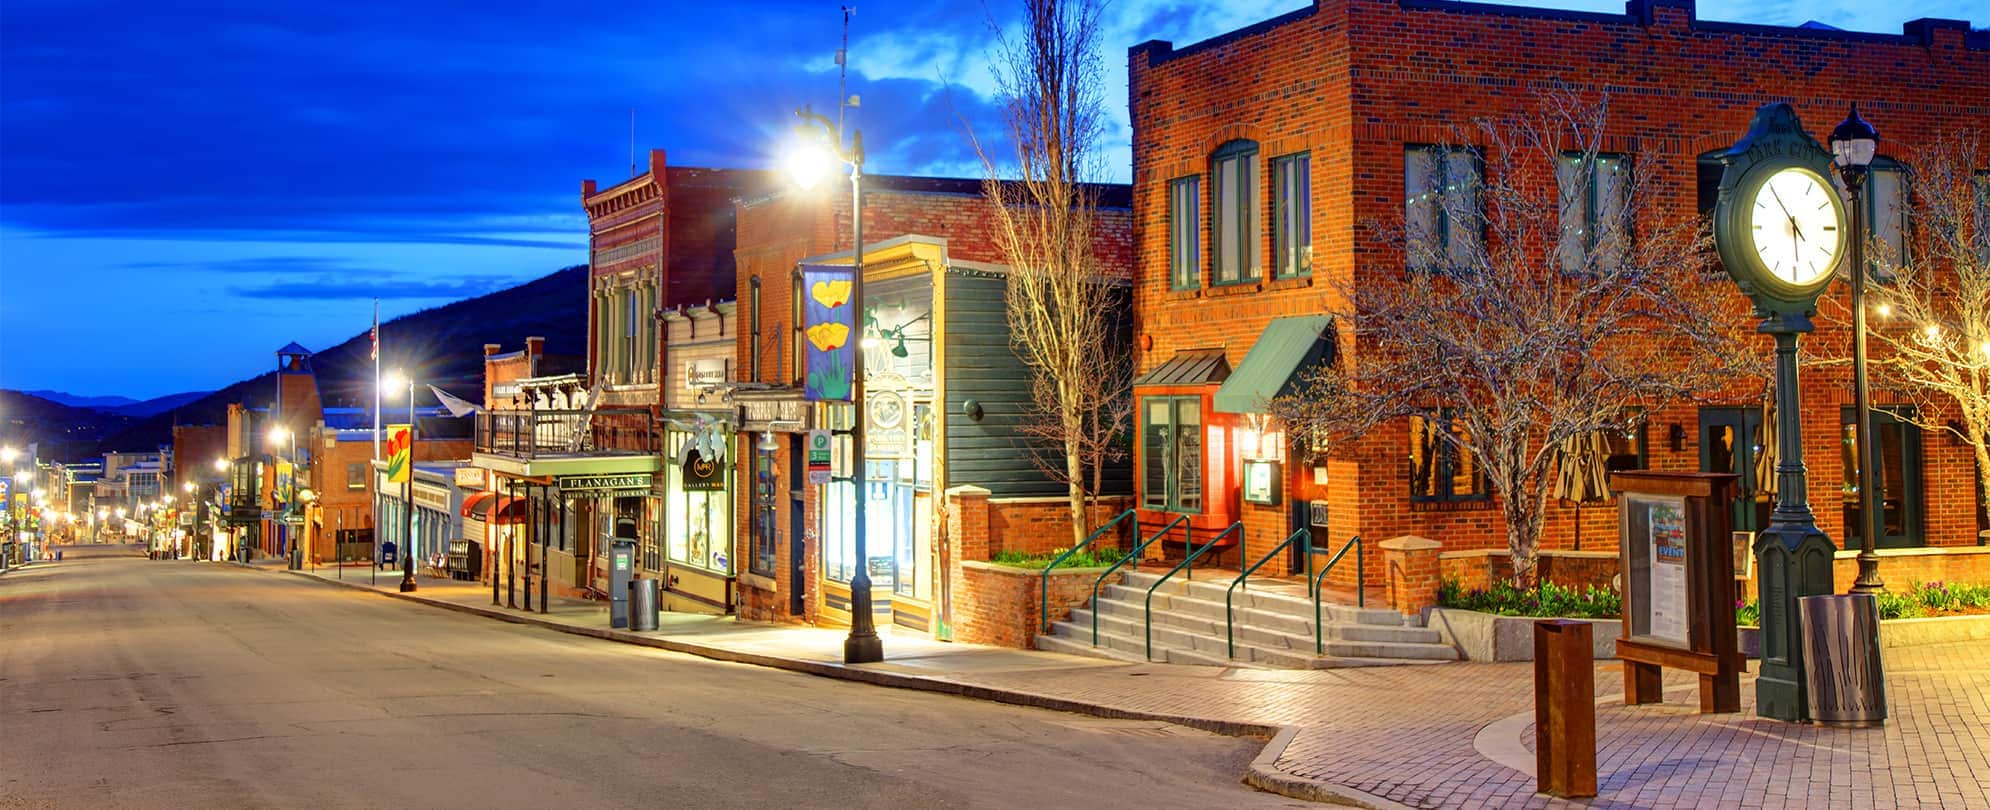 Main Street in Park City, Utah, a small downtown lit up at night.